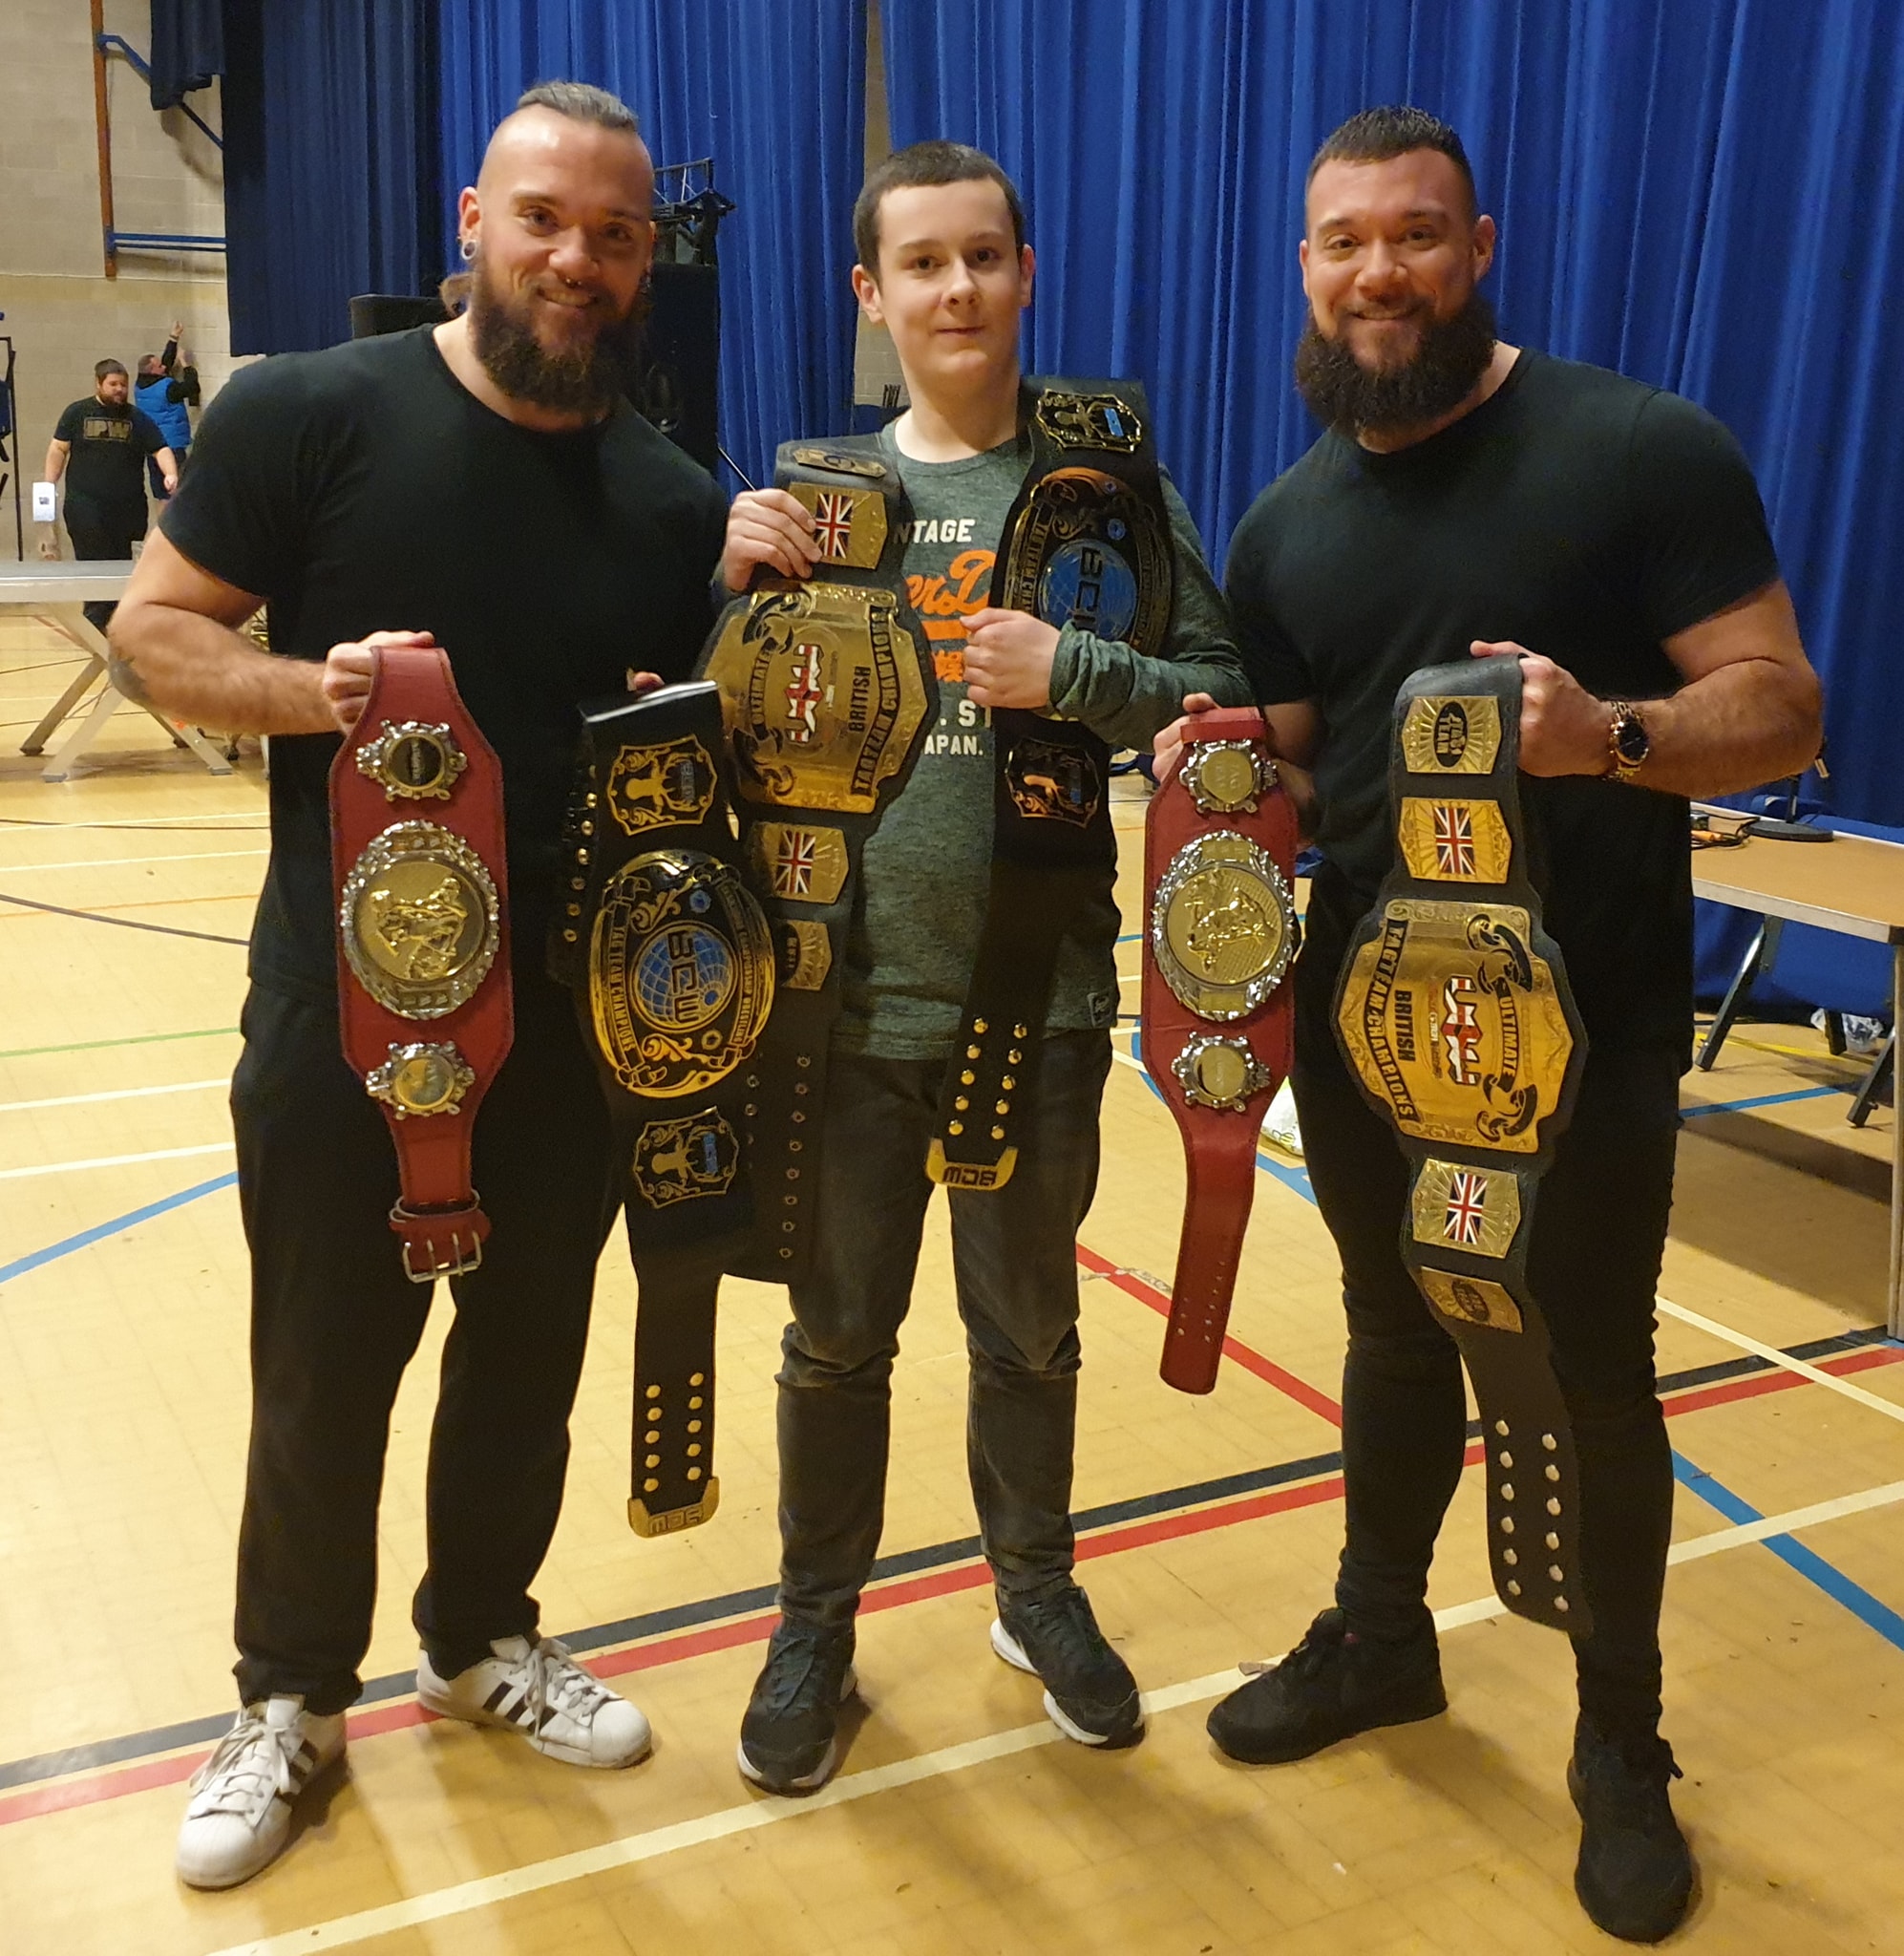 The Bone Brothers having picture taken with a fan and carrying 3 tag titles!